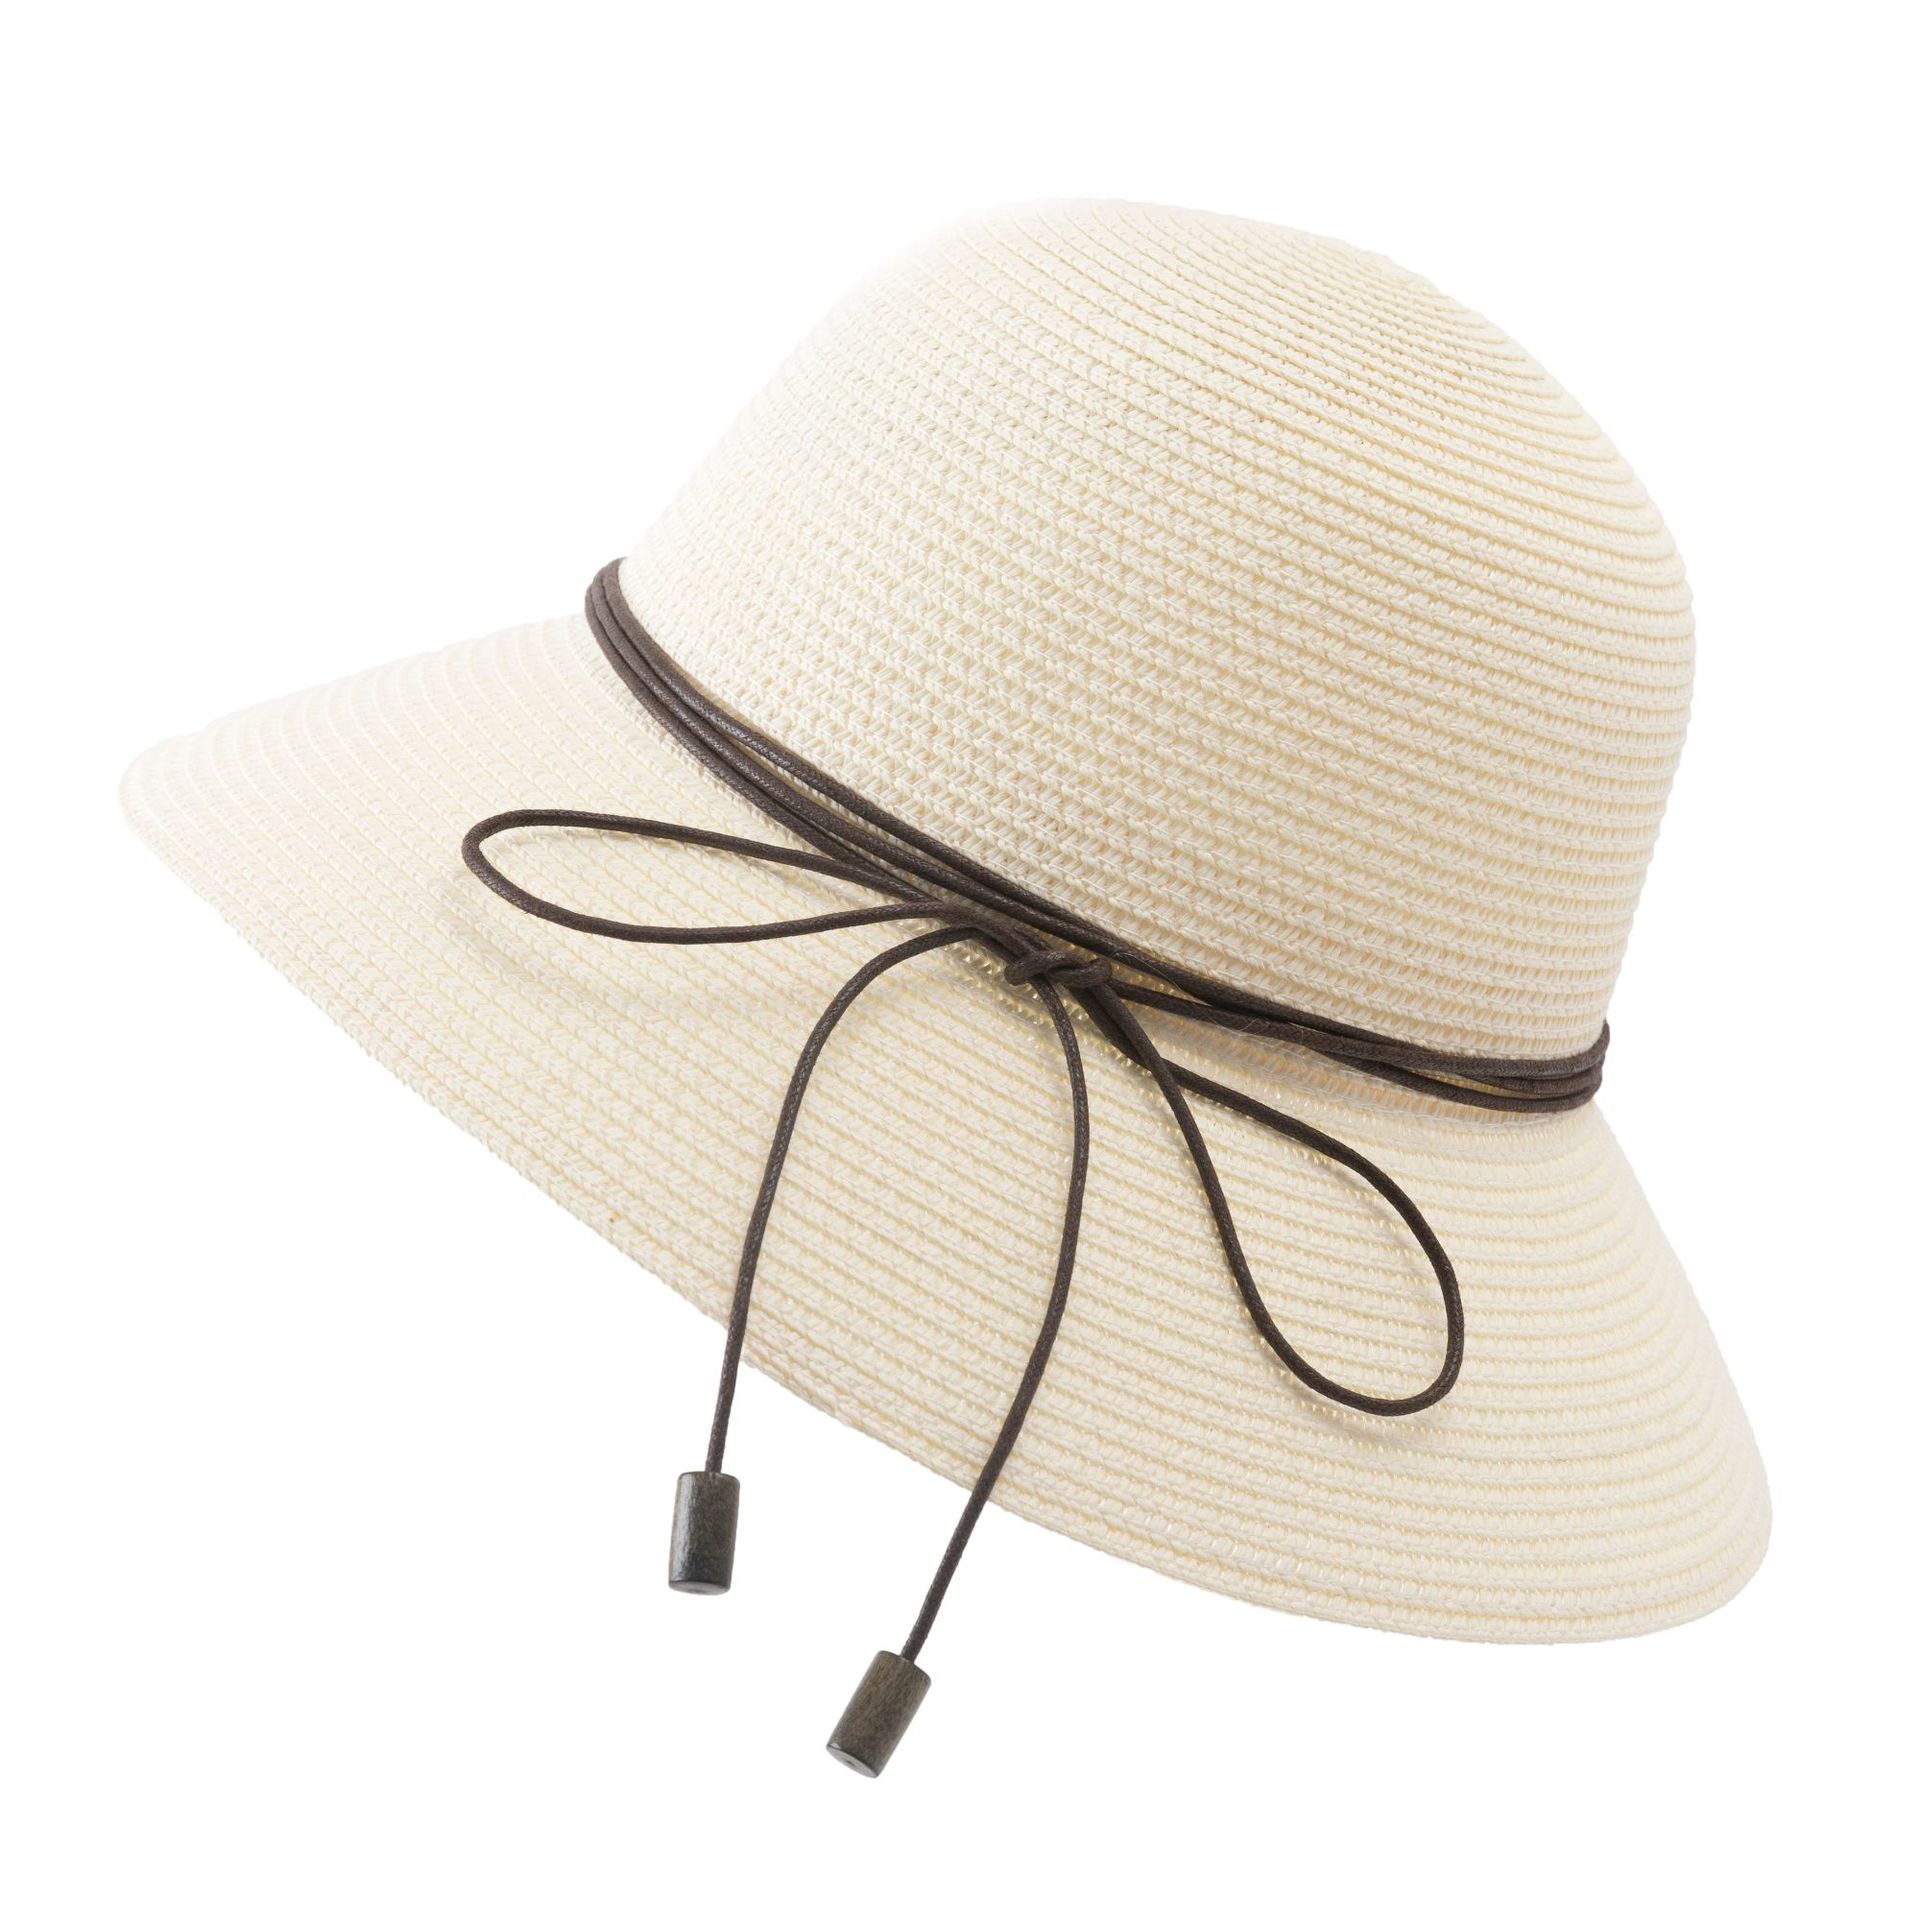 New Straw Hat Women's Summer Little Fresh Foldable Sun Protection Sun Hat Casual Vacation Seaside Beach Hat in Stock